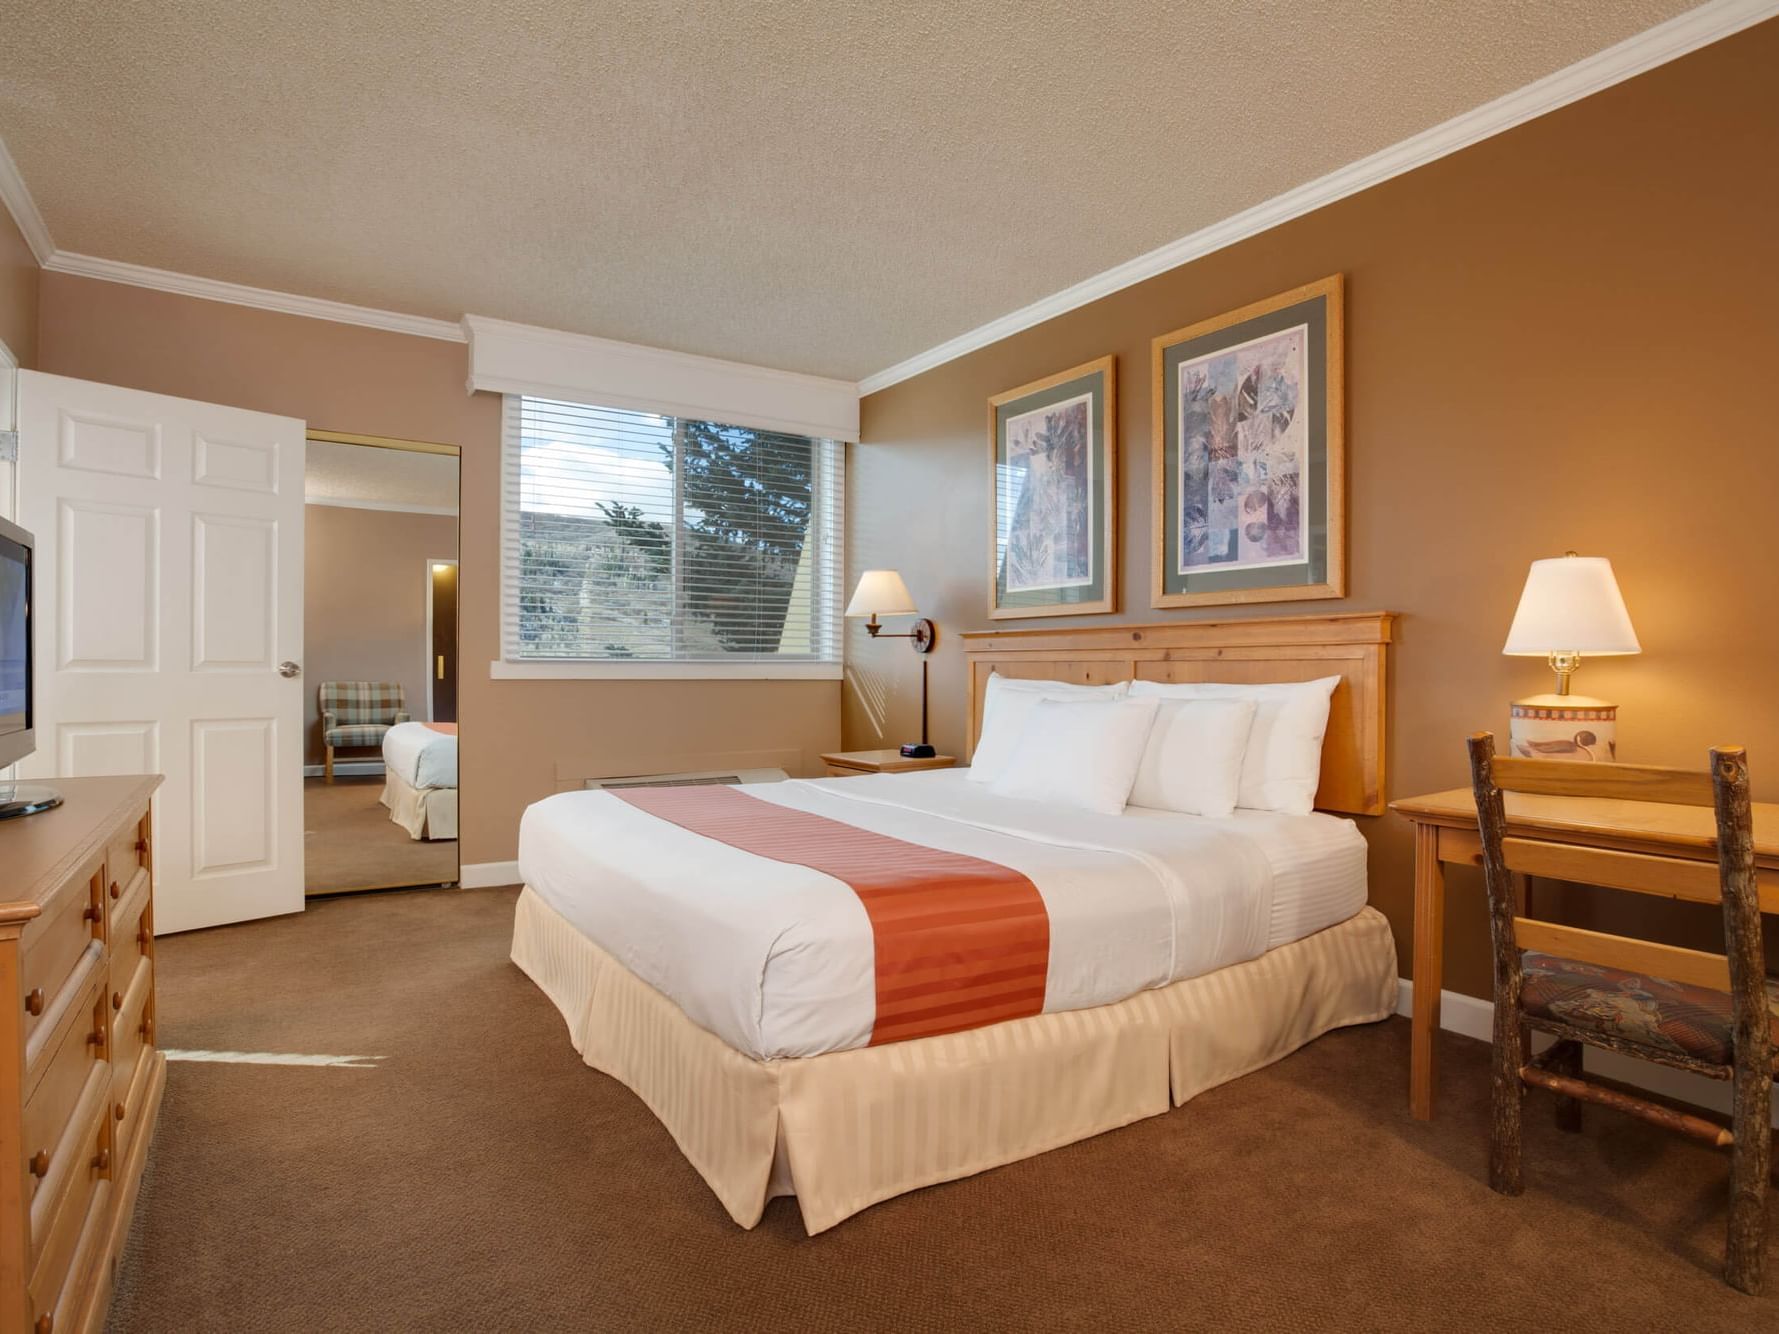 Bedroom in One Bedroom Suite at Legacy Vacation Resorts